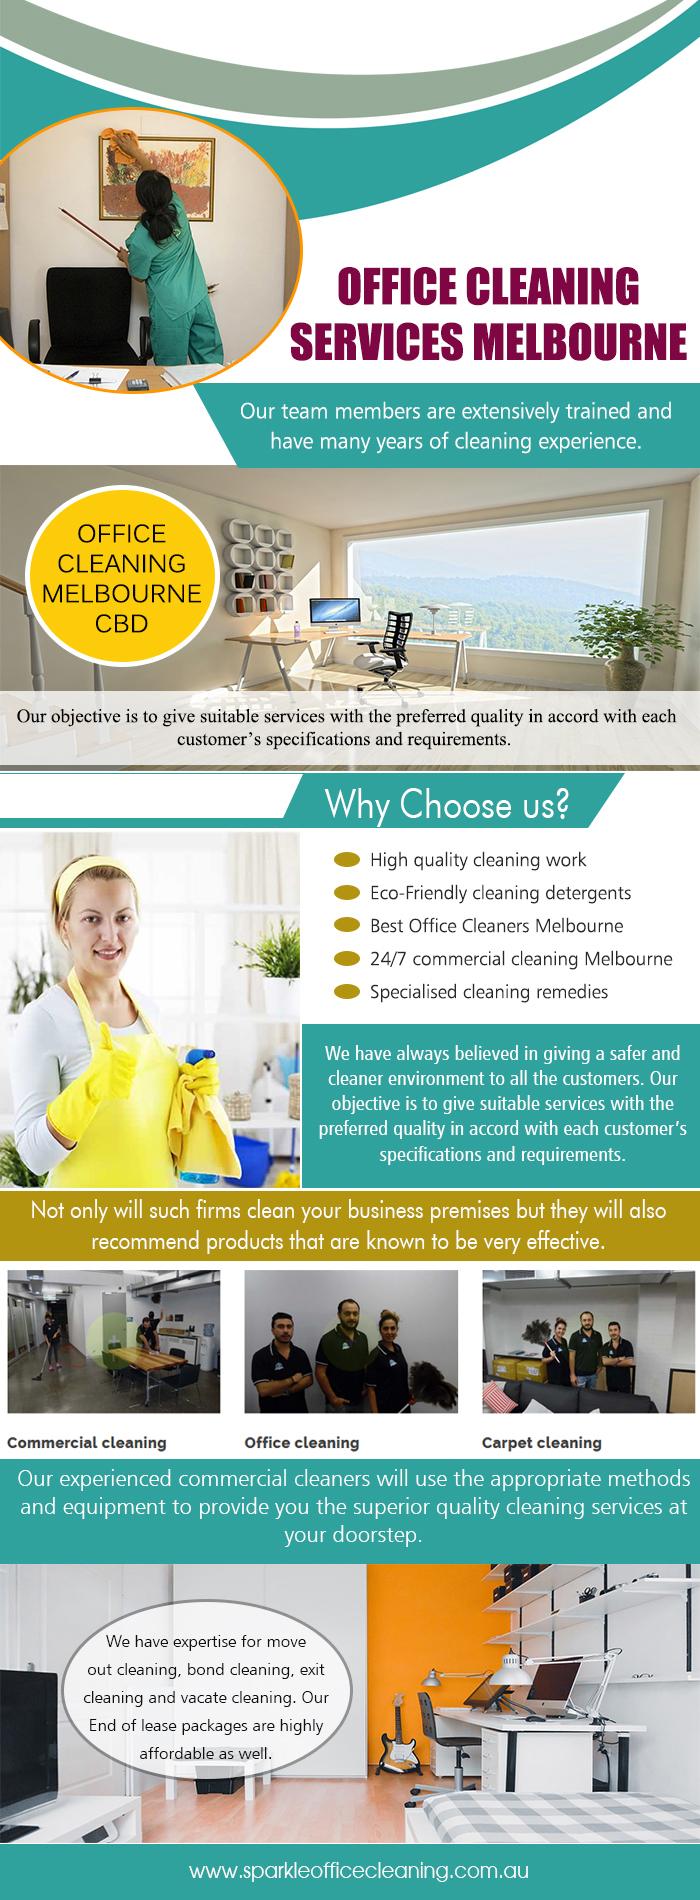 Office Cleaning Services Melbourne | sparkleofficecleaning.com.au